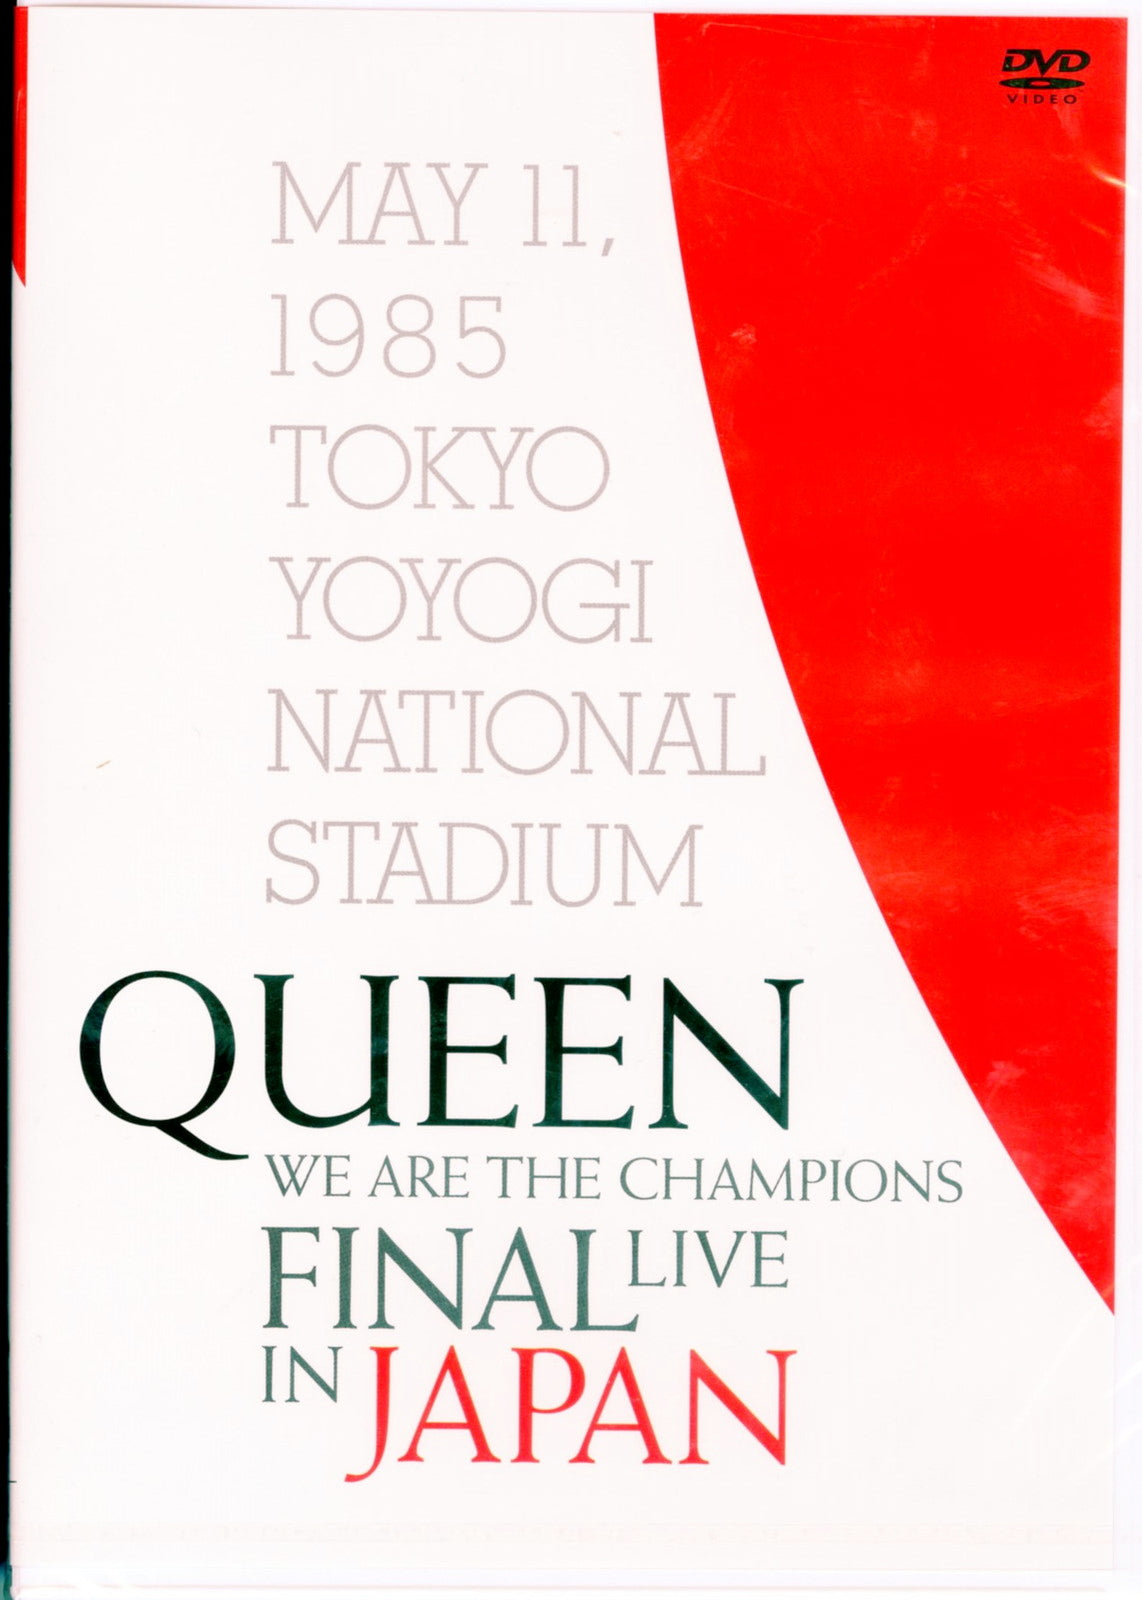 Queen - We Are The Champions Final Live In Japan – CDs Vinyl Japan